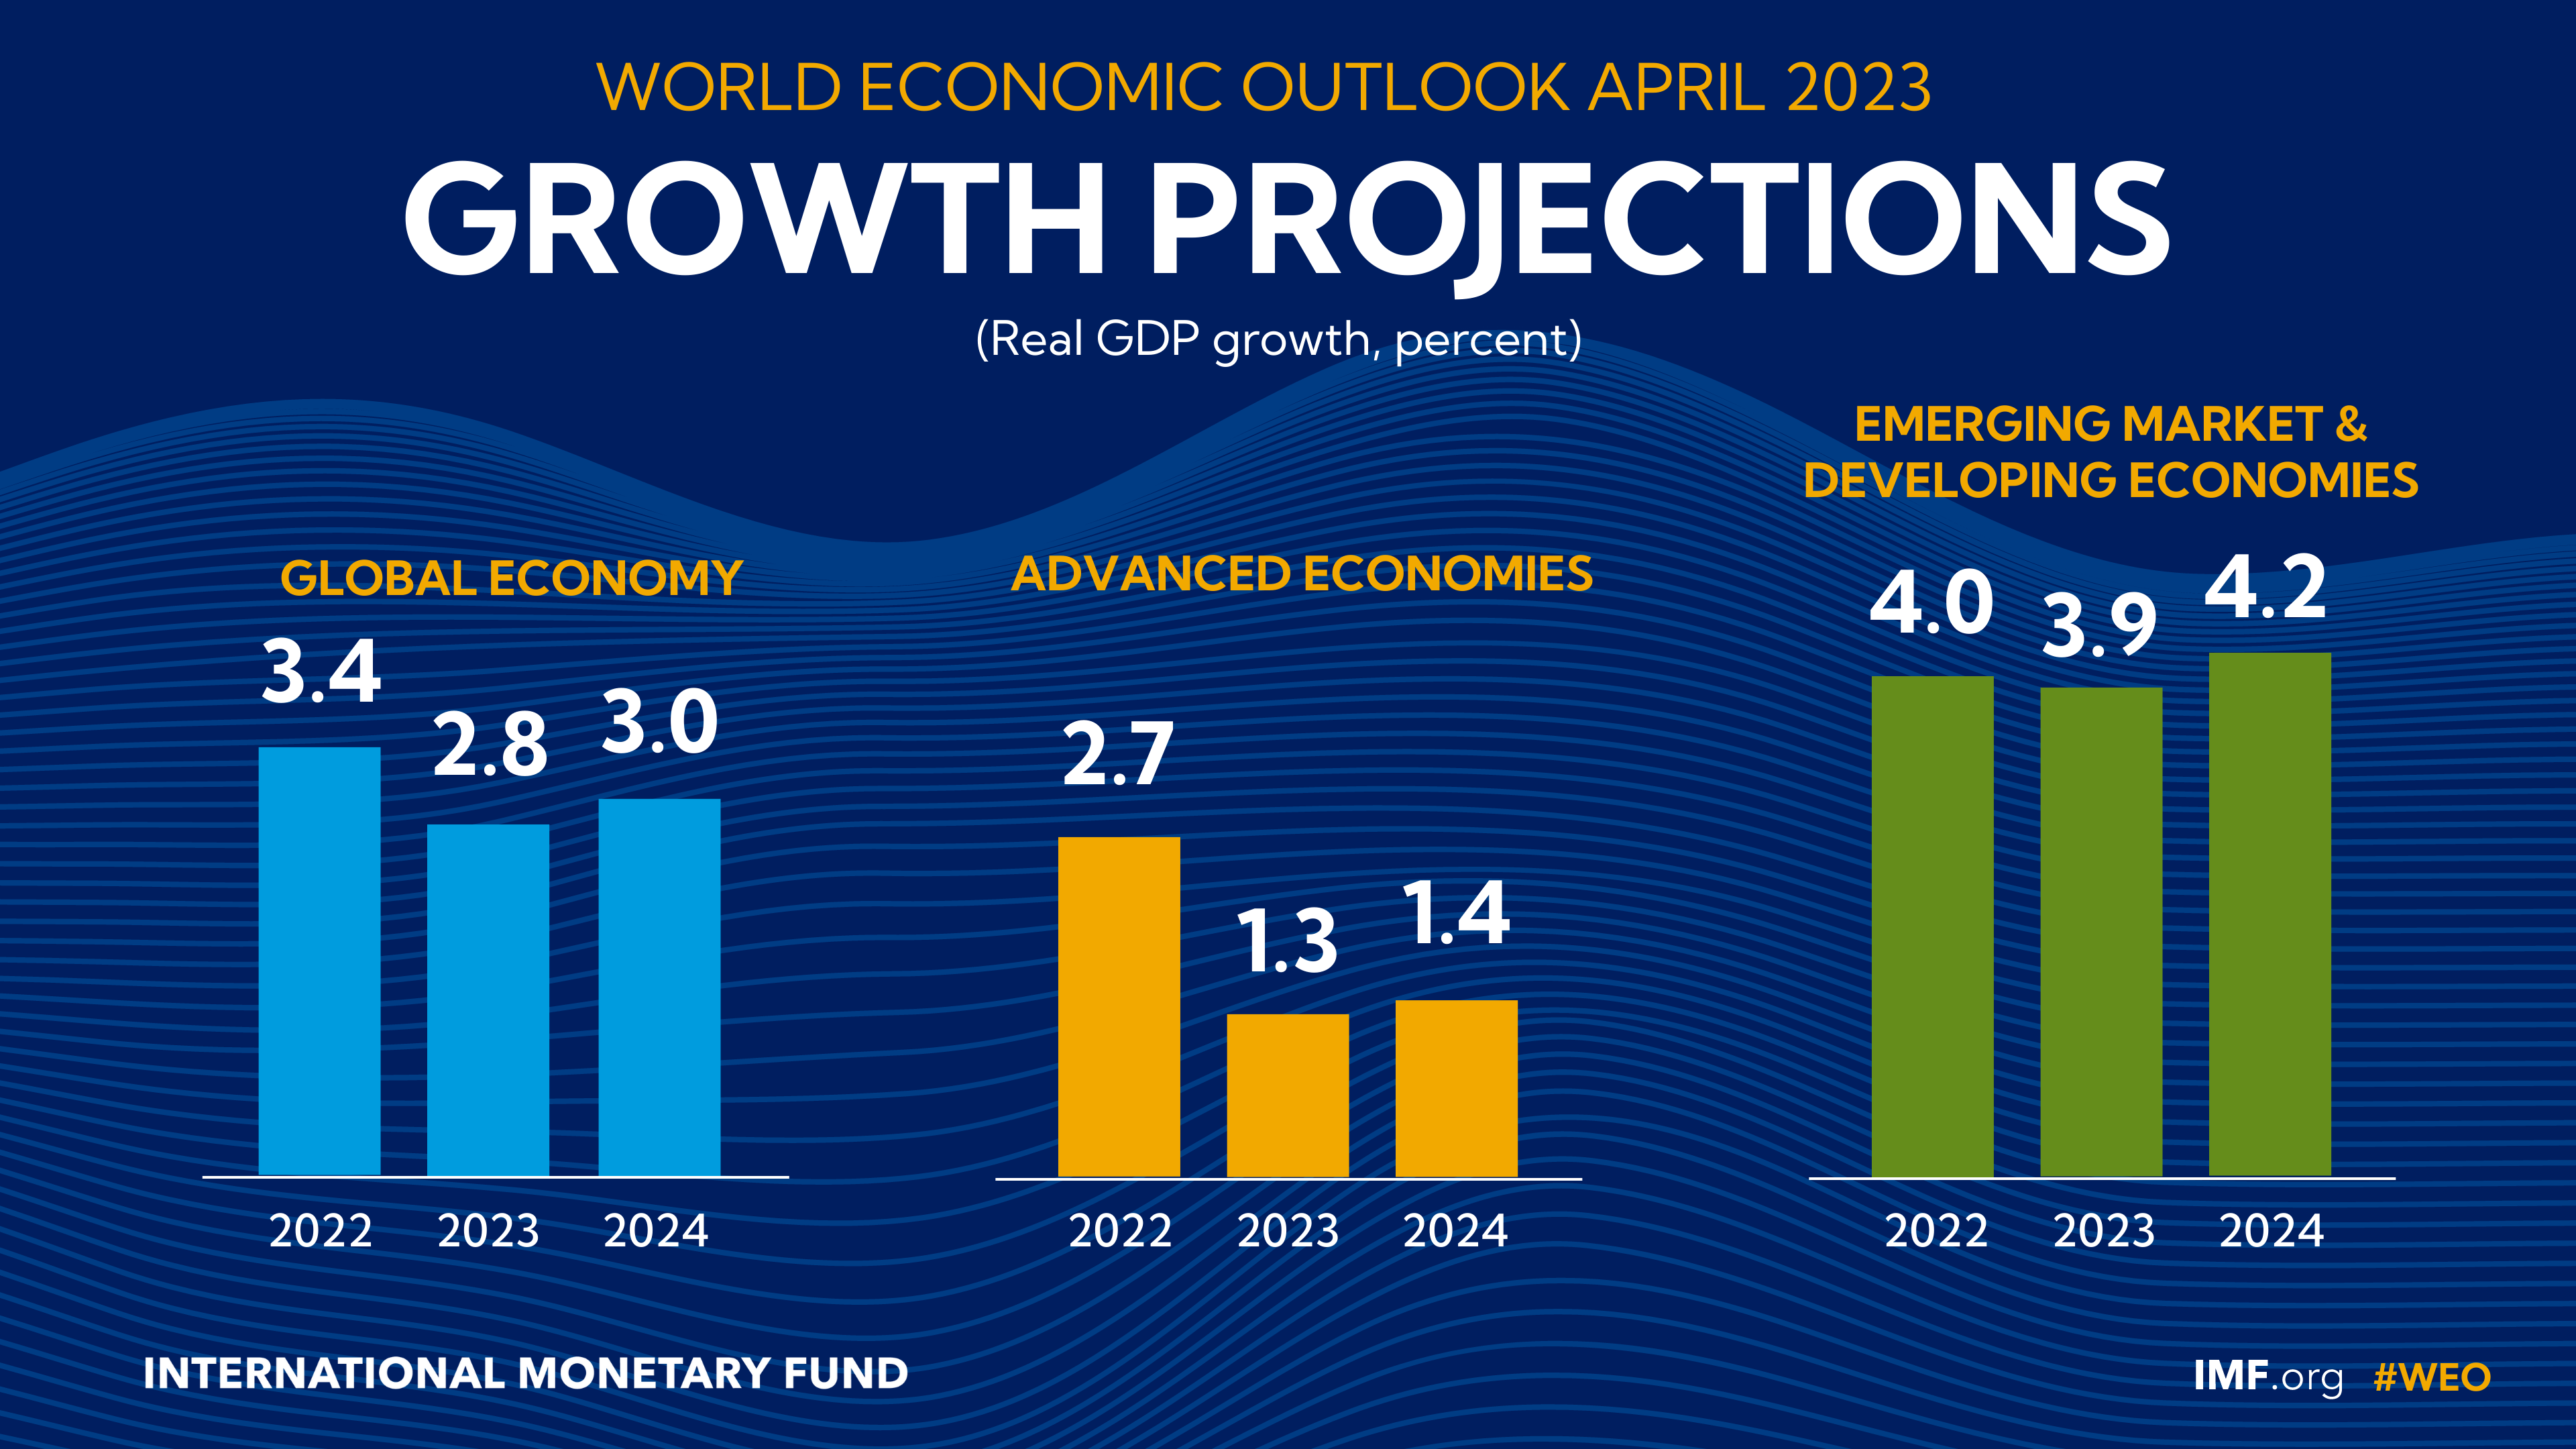 What will happen to the economy in 2023?